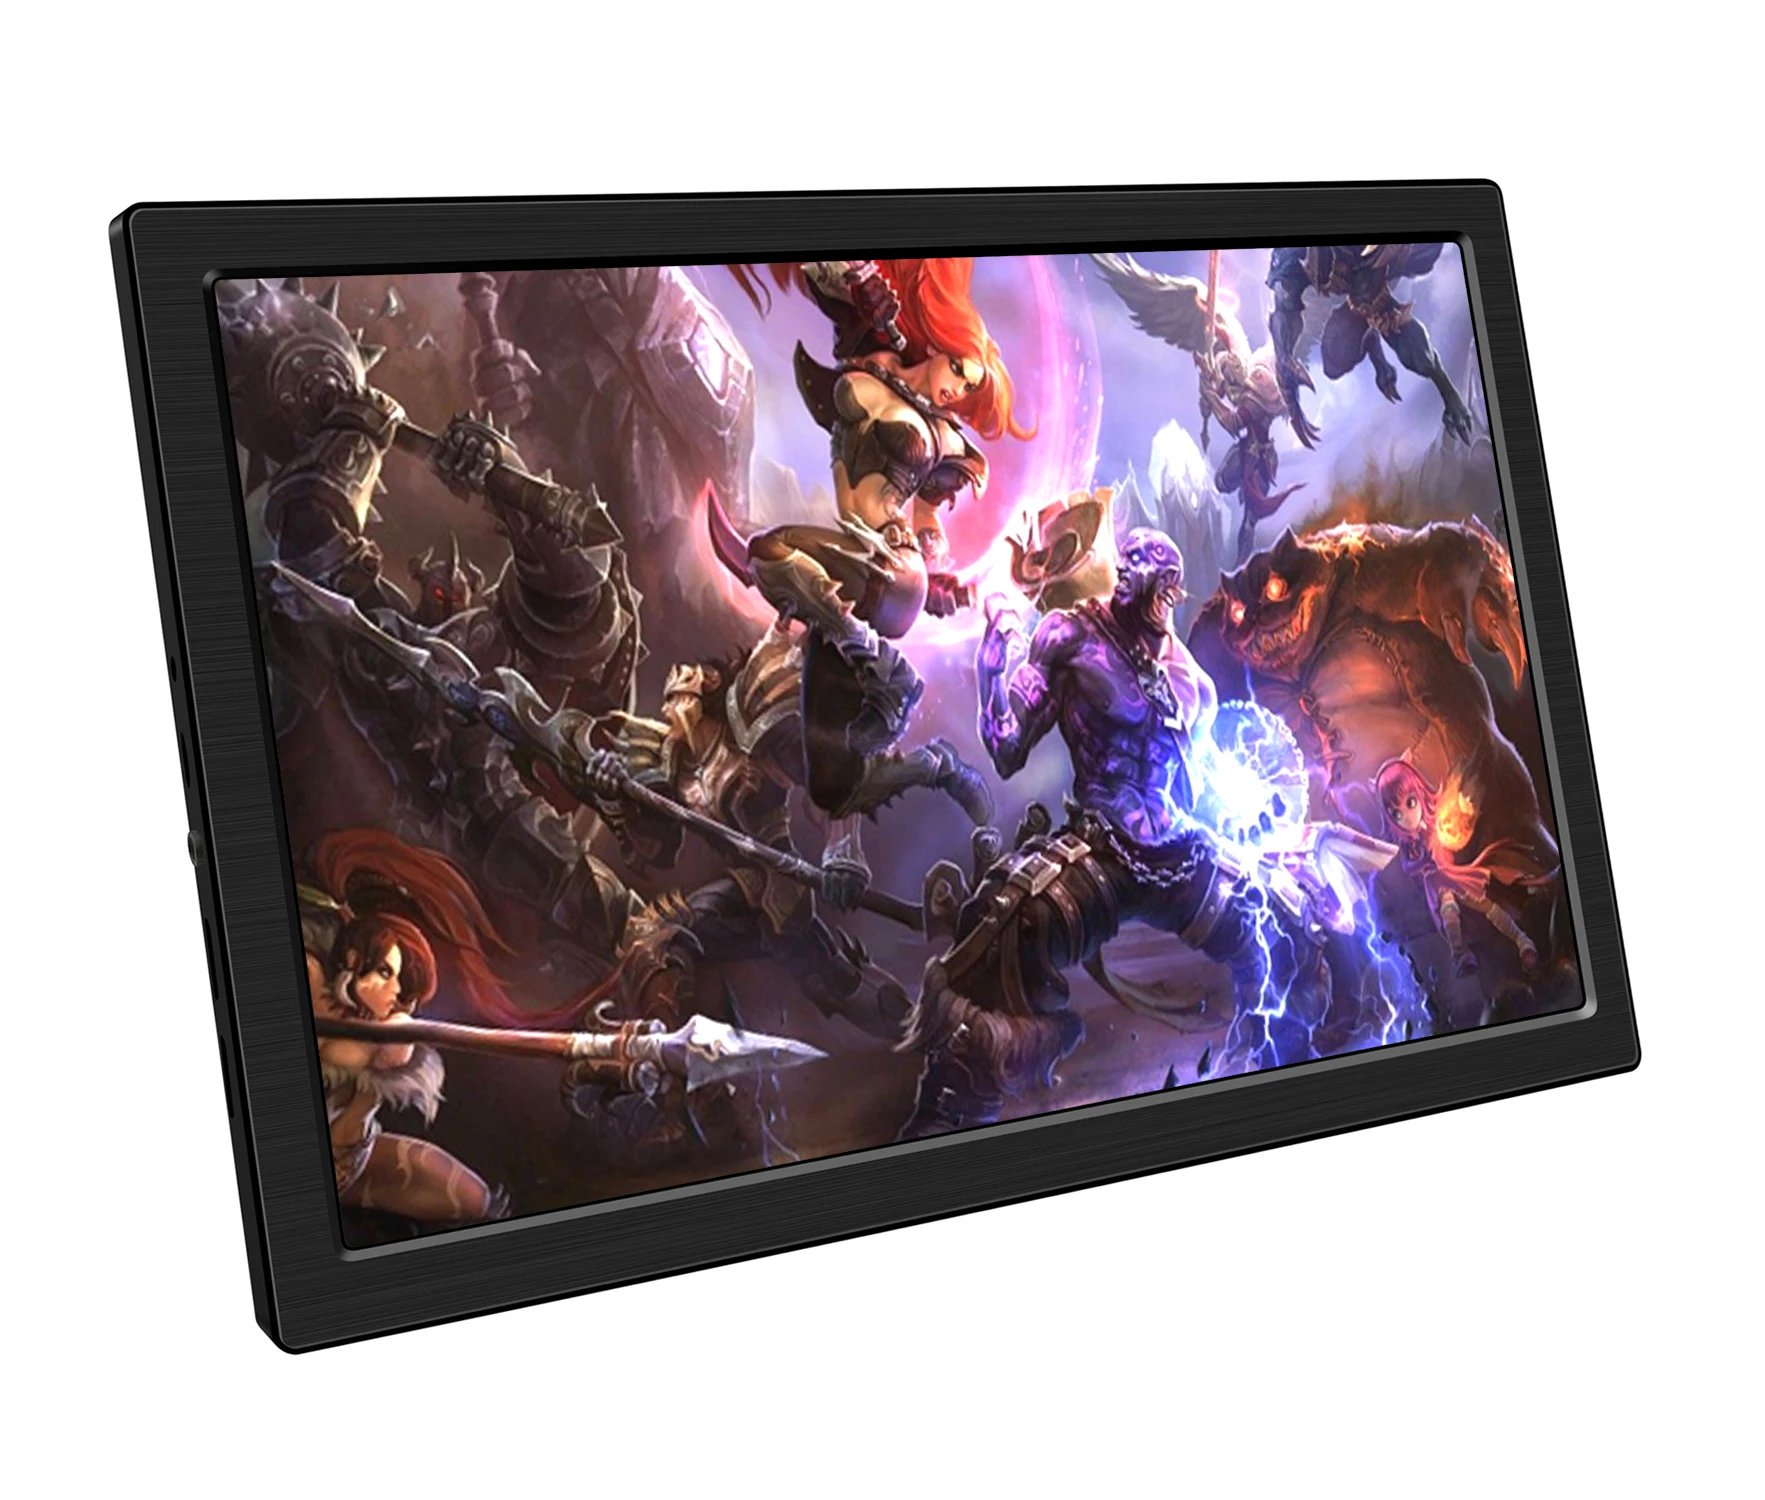 

10.1 Inch Portable Gaming Monitor 2K Resolution IPS QHD LCD Display With Hdmi Input,USB Powered, Black